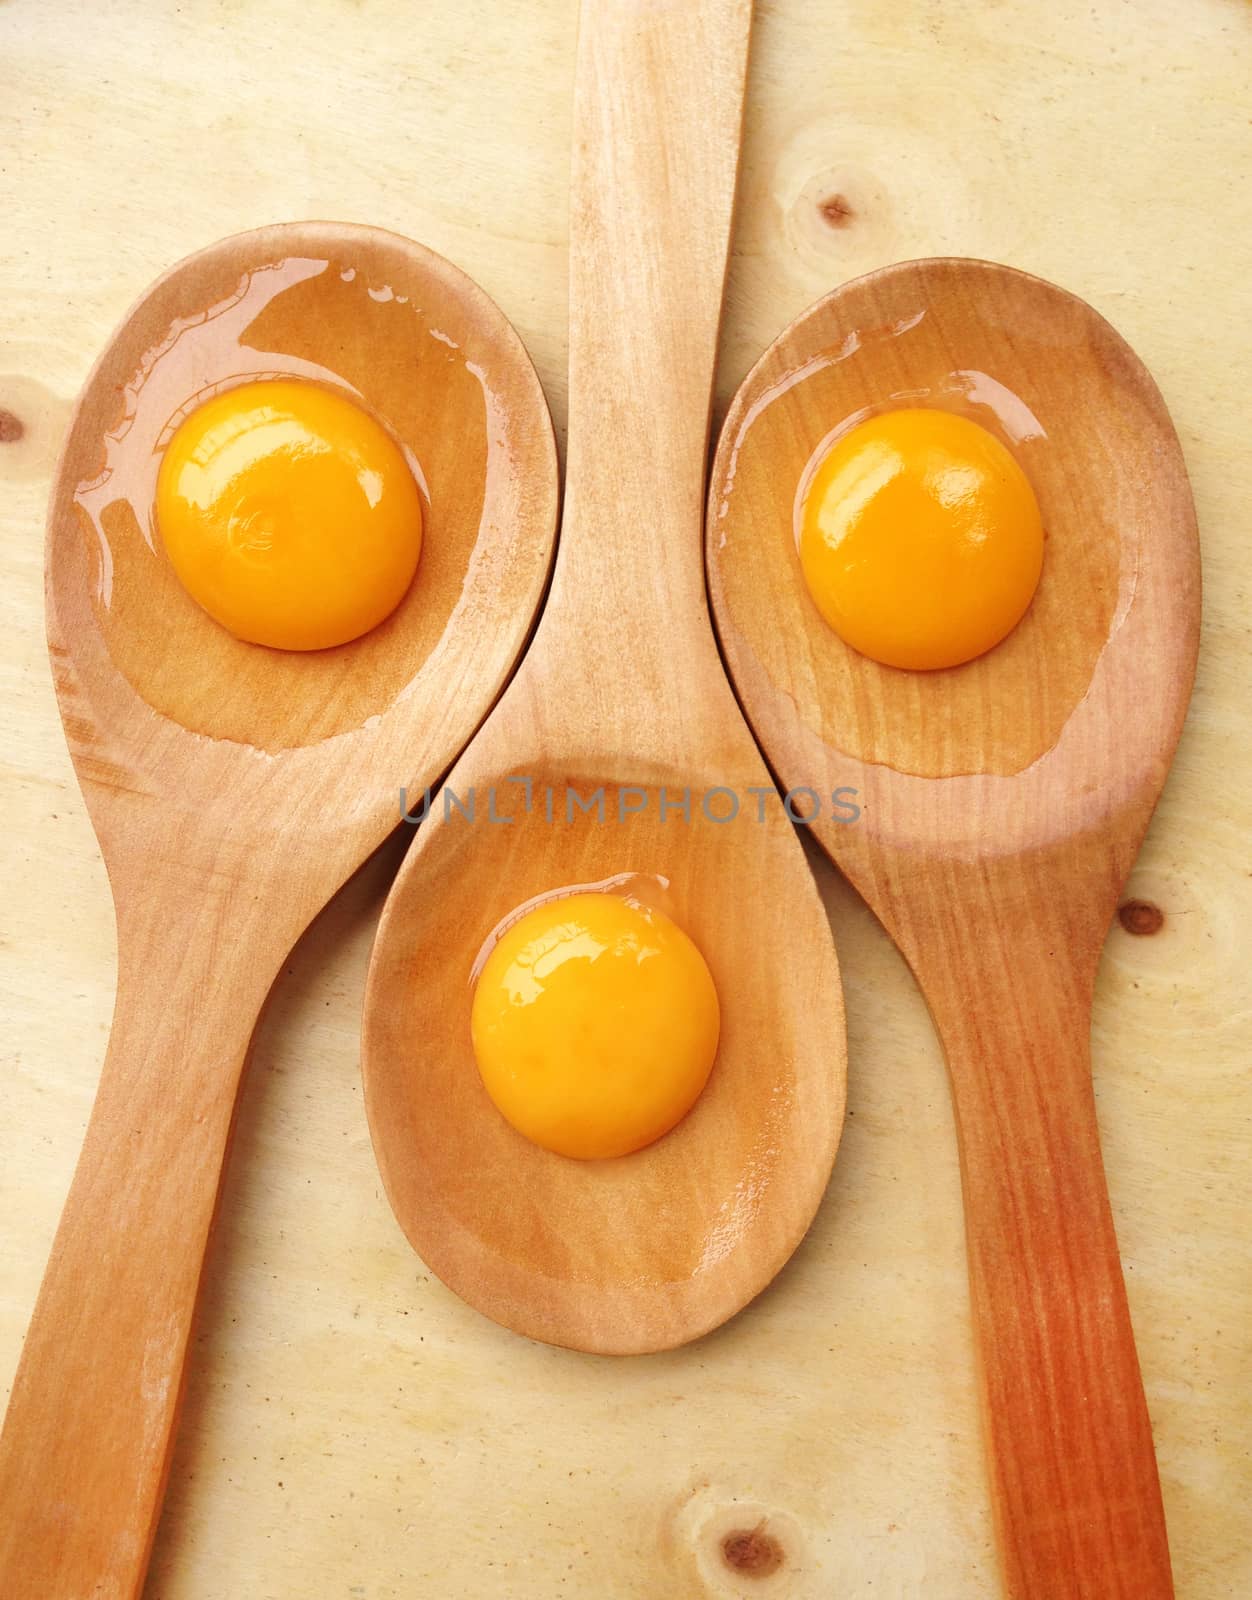 York eggs on wooden ladle on wooden background